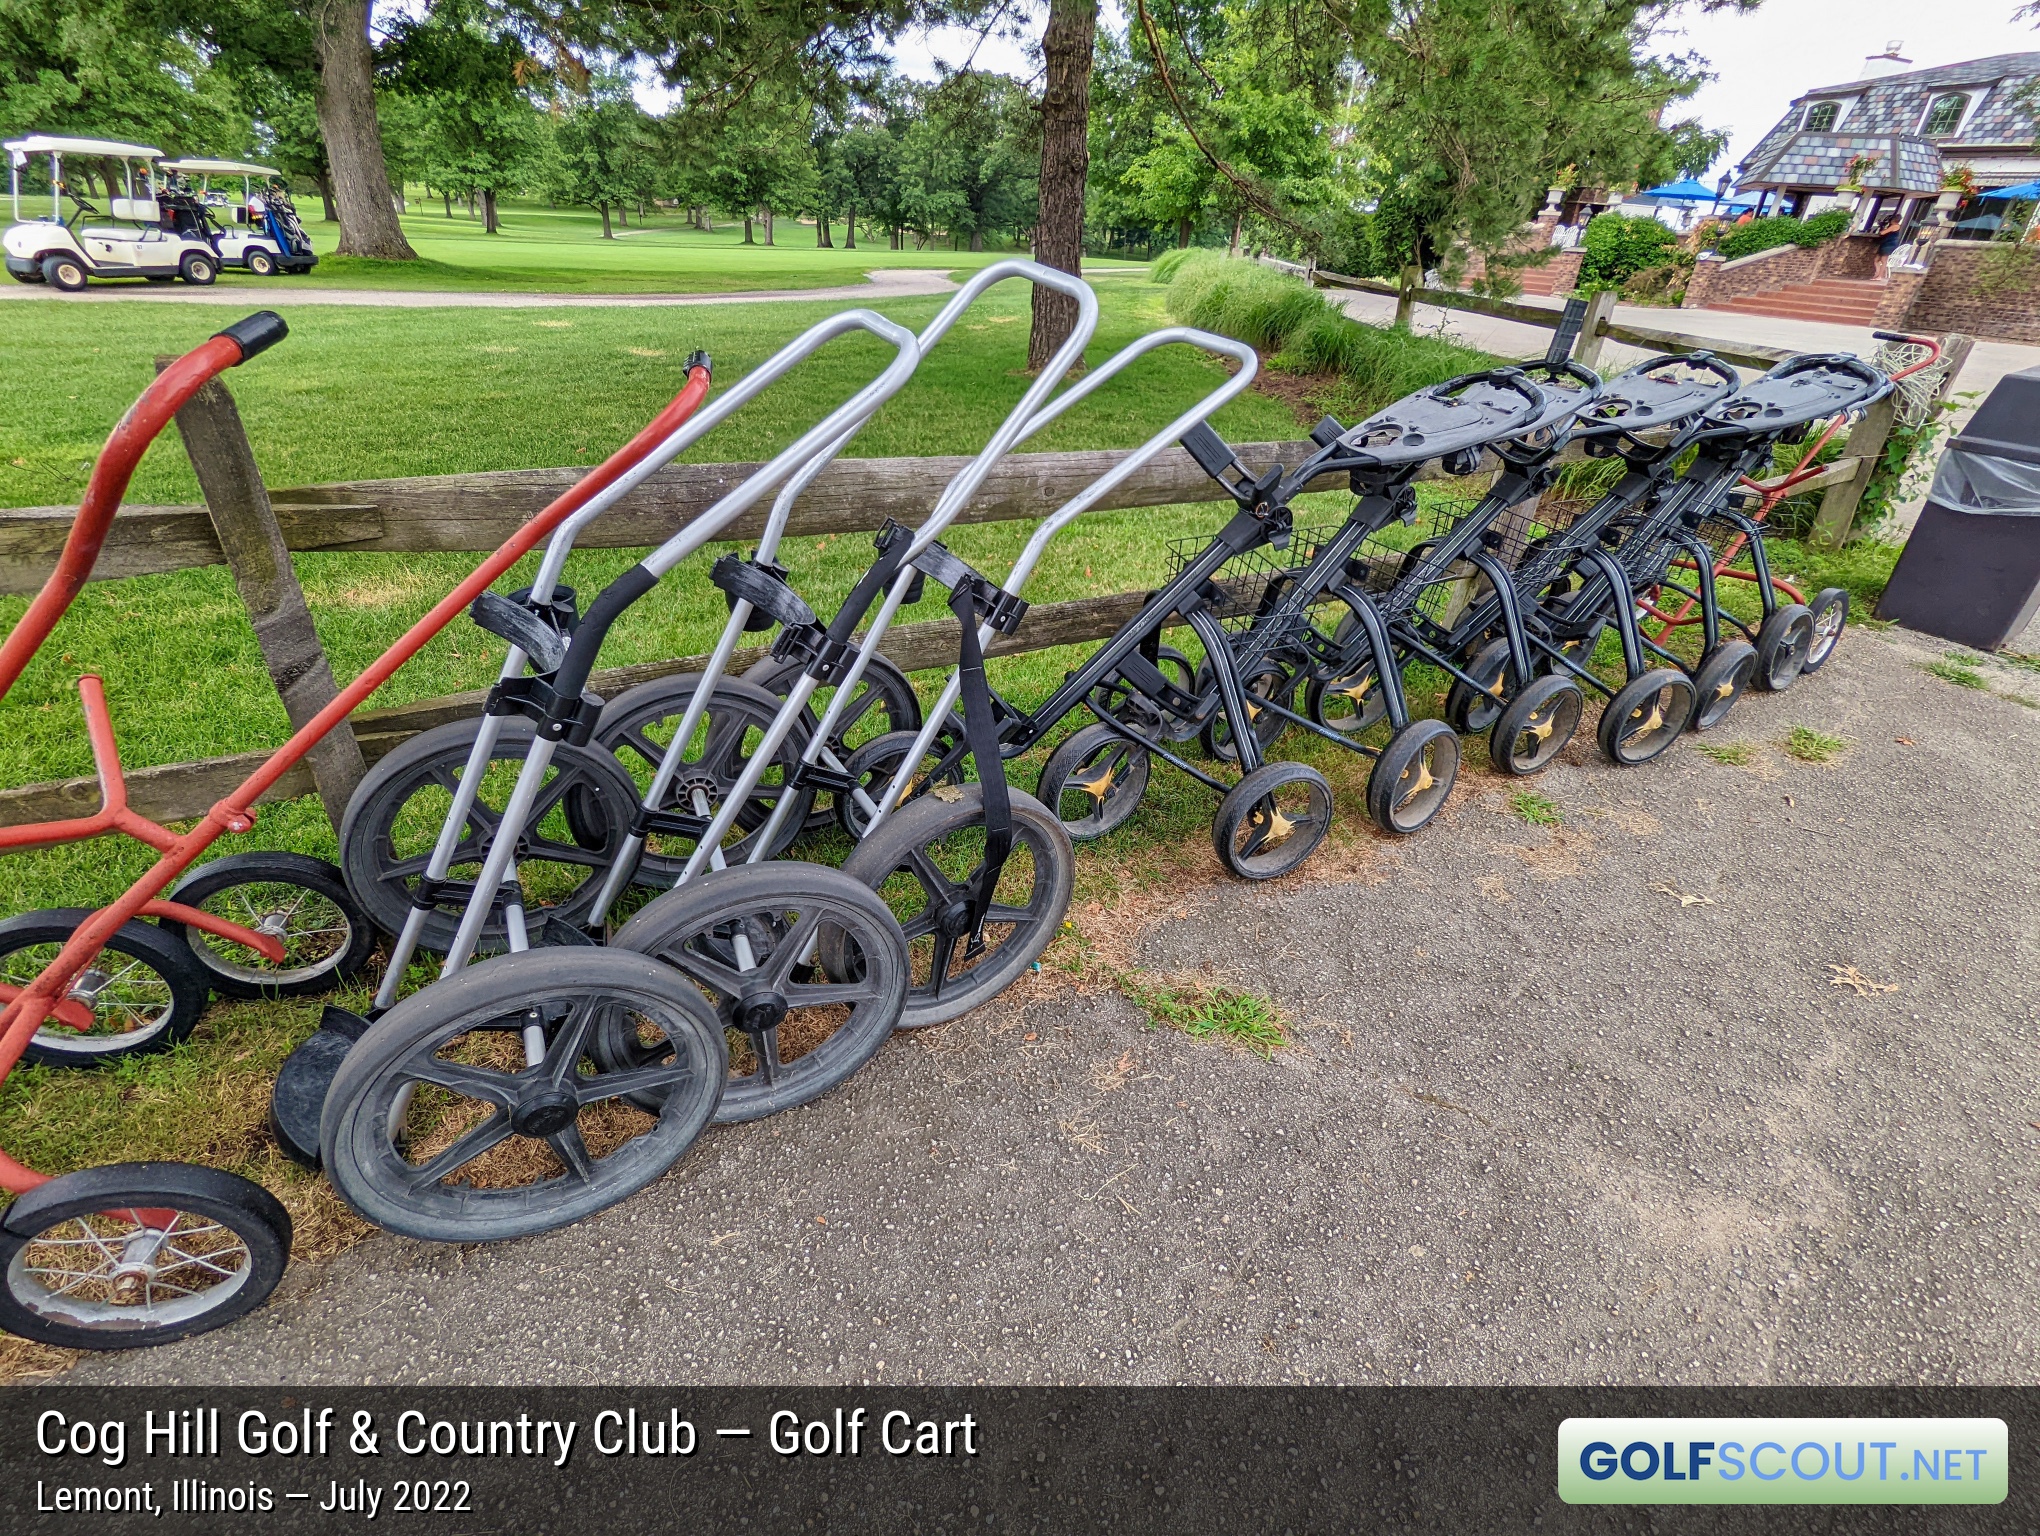 Photo of the golf carts at Cog Hill Course #2 - Ravines in Lemont, Illinois. Rental push carts.